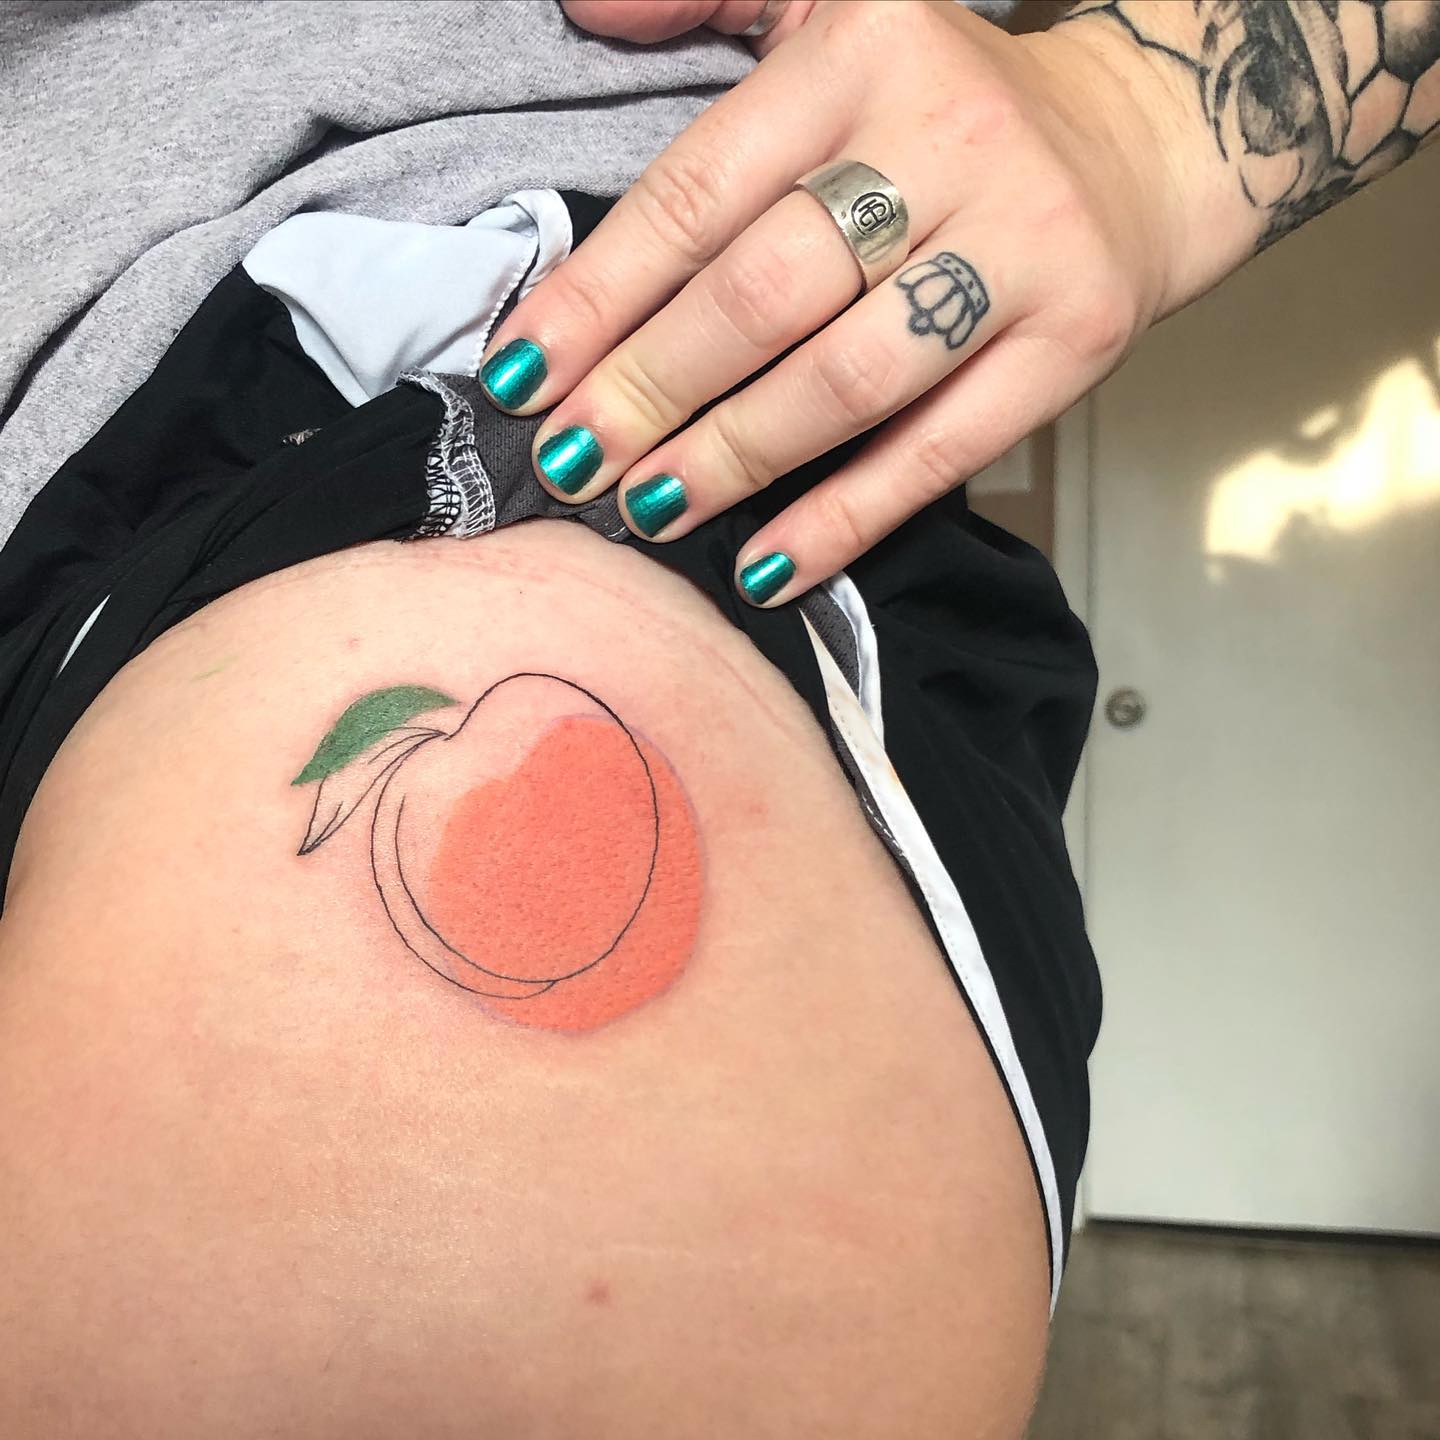 Cute, fun, and creative, this peach tattoo on a hip is a fun way of doing a tattoo and showing your inner crazy and wild side. If you’re a sexy sensual person this will look amazing on those who are wild and crazy.